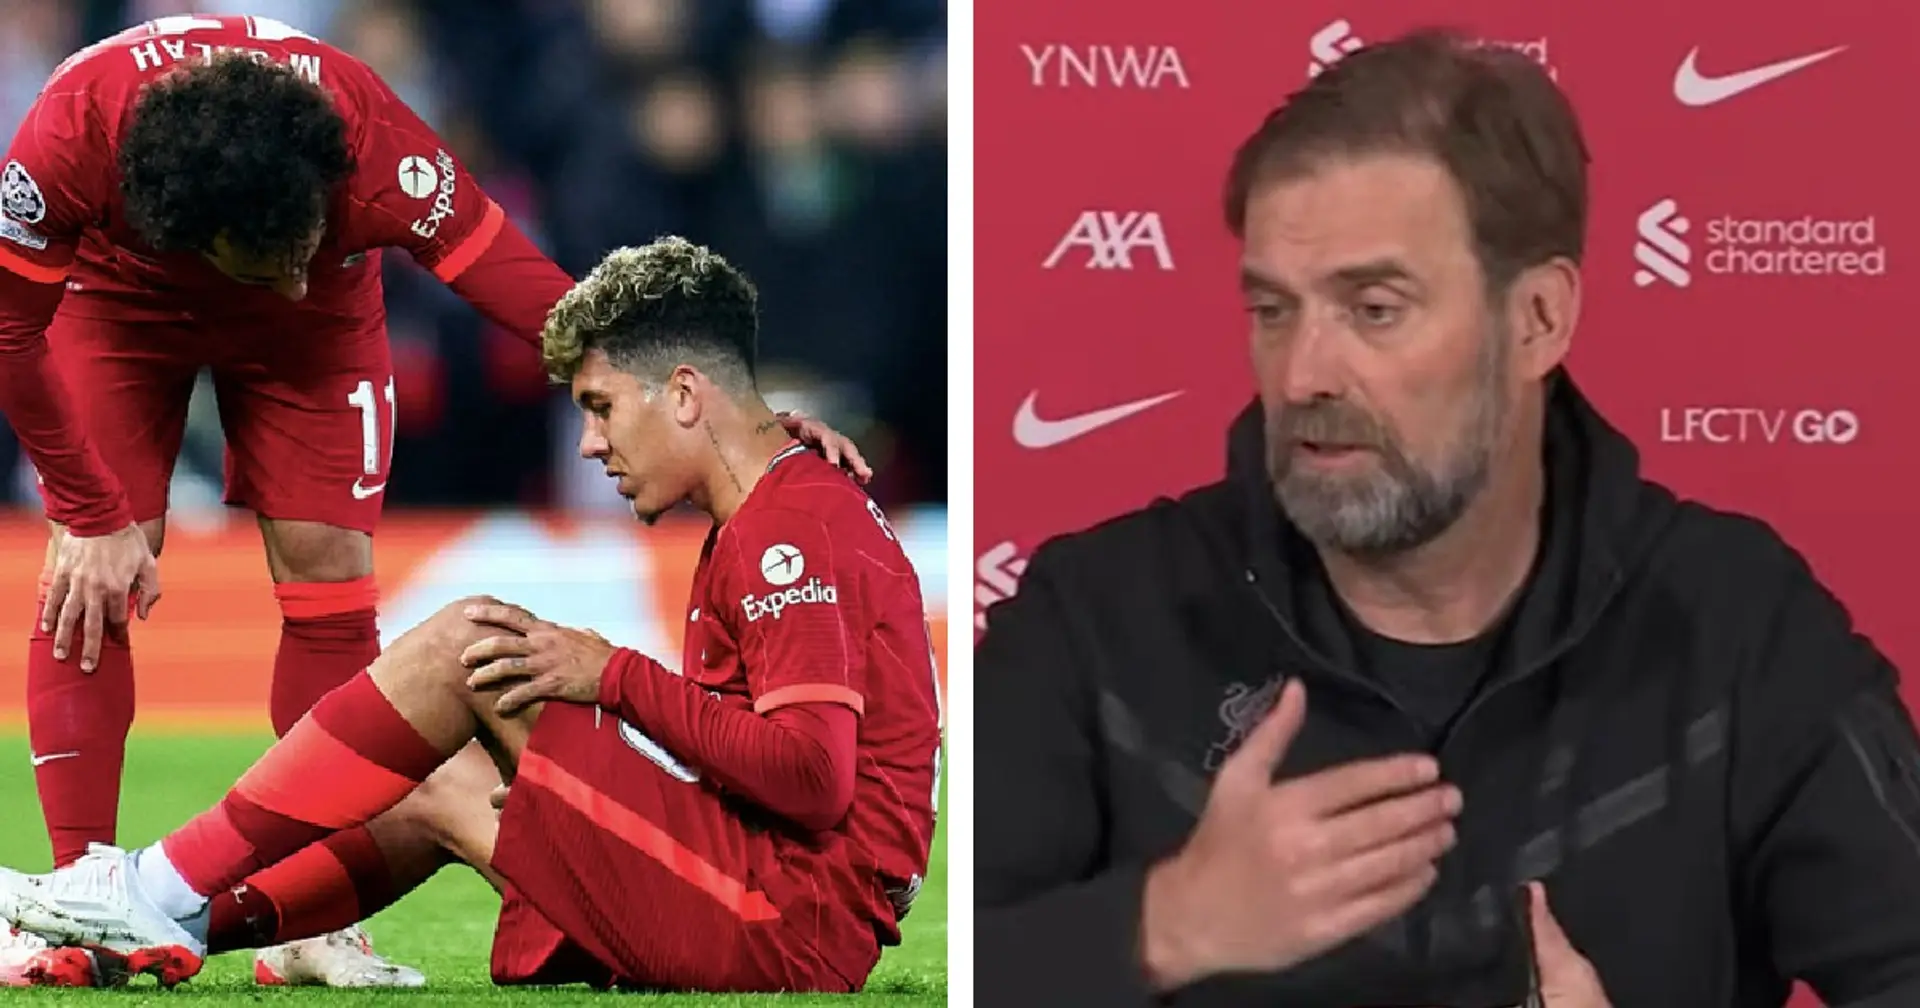 'Takes a little bit longer than we all thought': Klopp provides injury update on Firmino